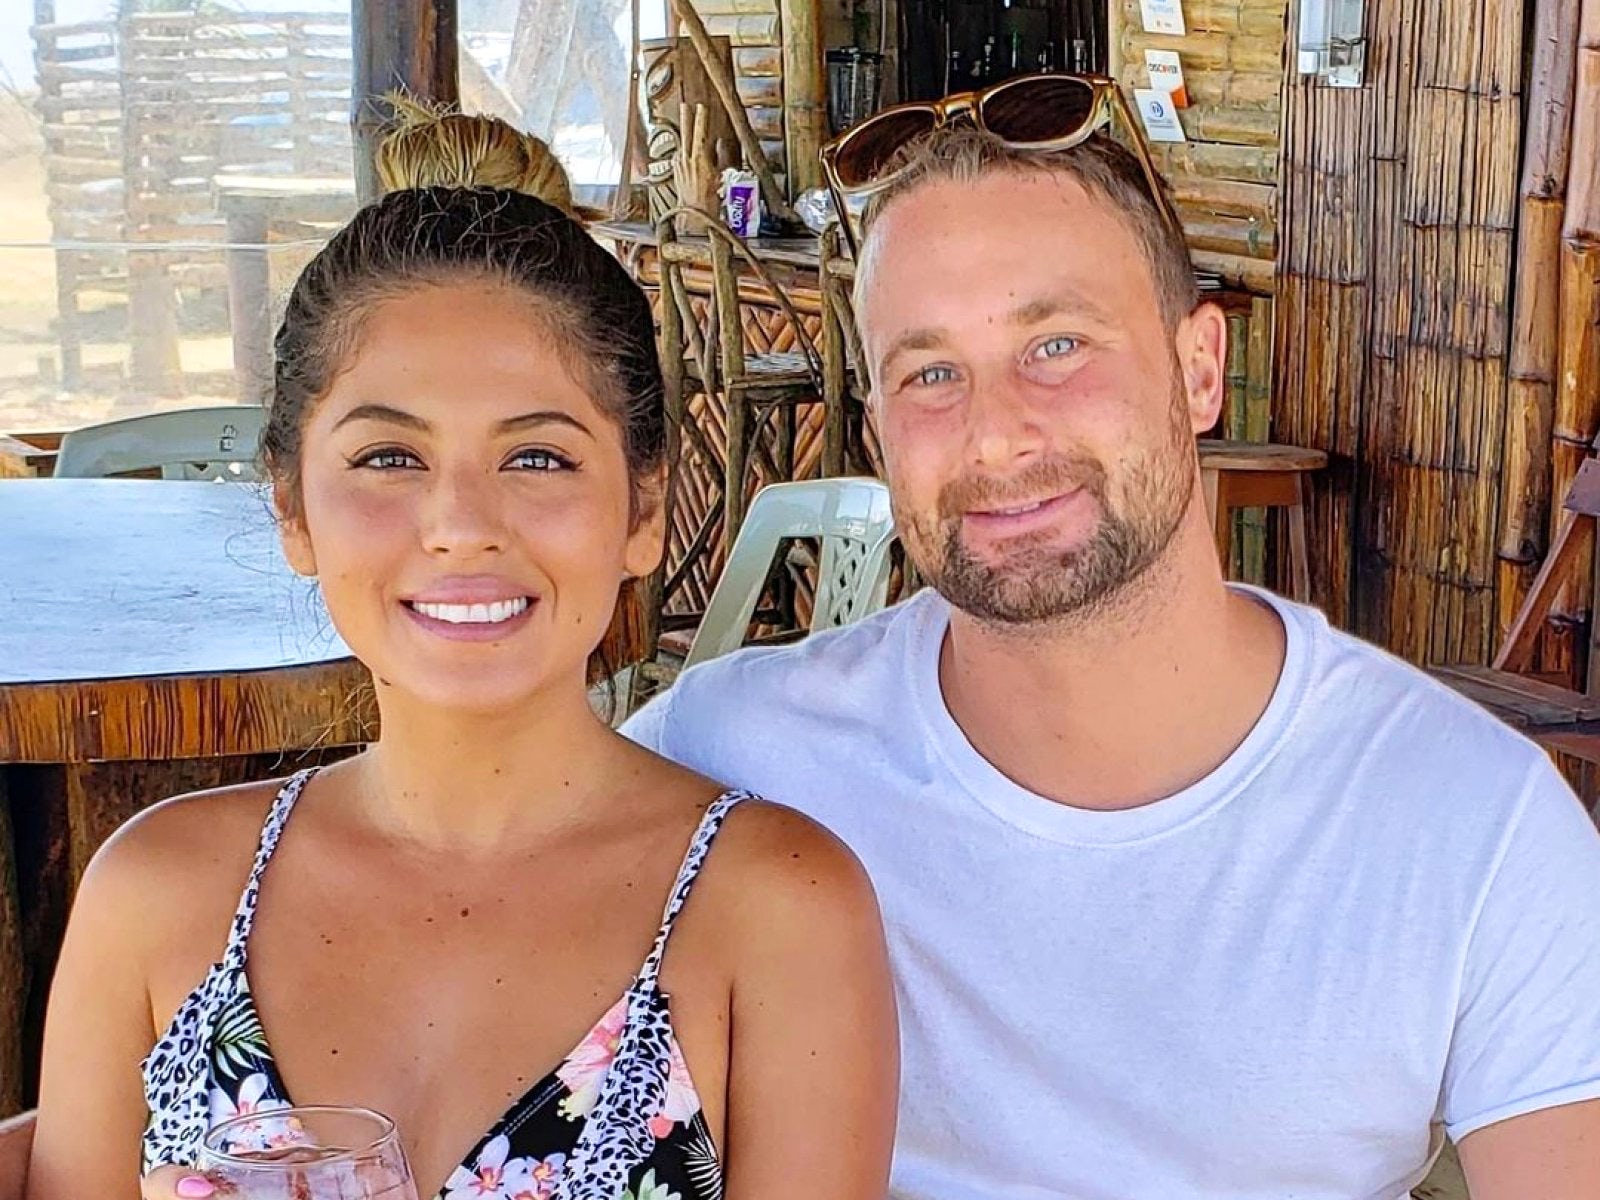 90 Day Fiance' star Evelin Villegas claims Corey Rathgeber is an alcoholic and she's done with him